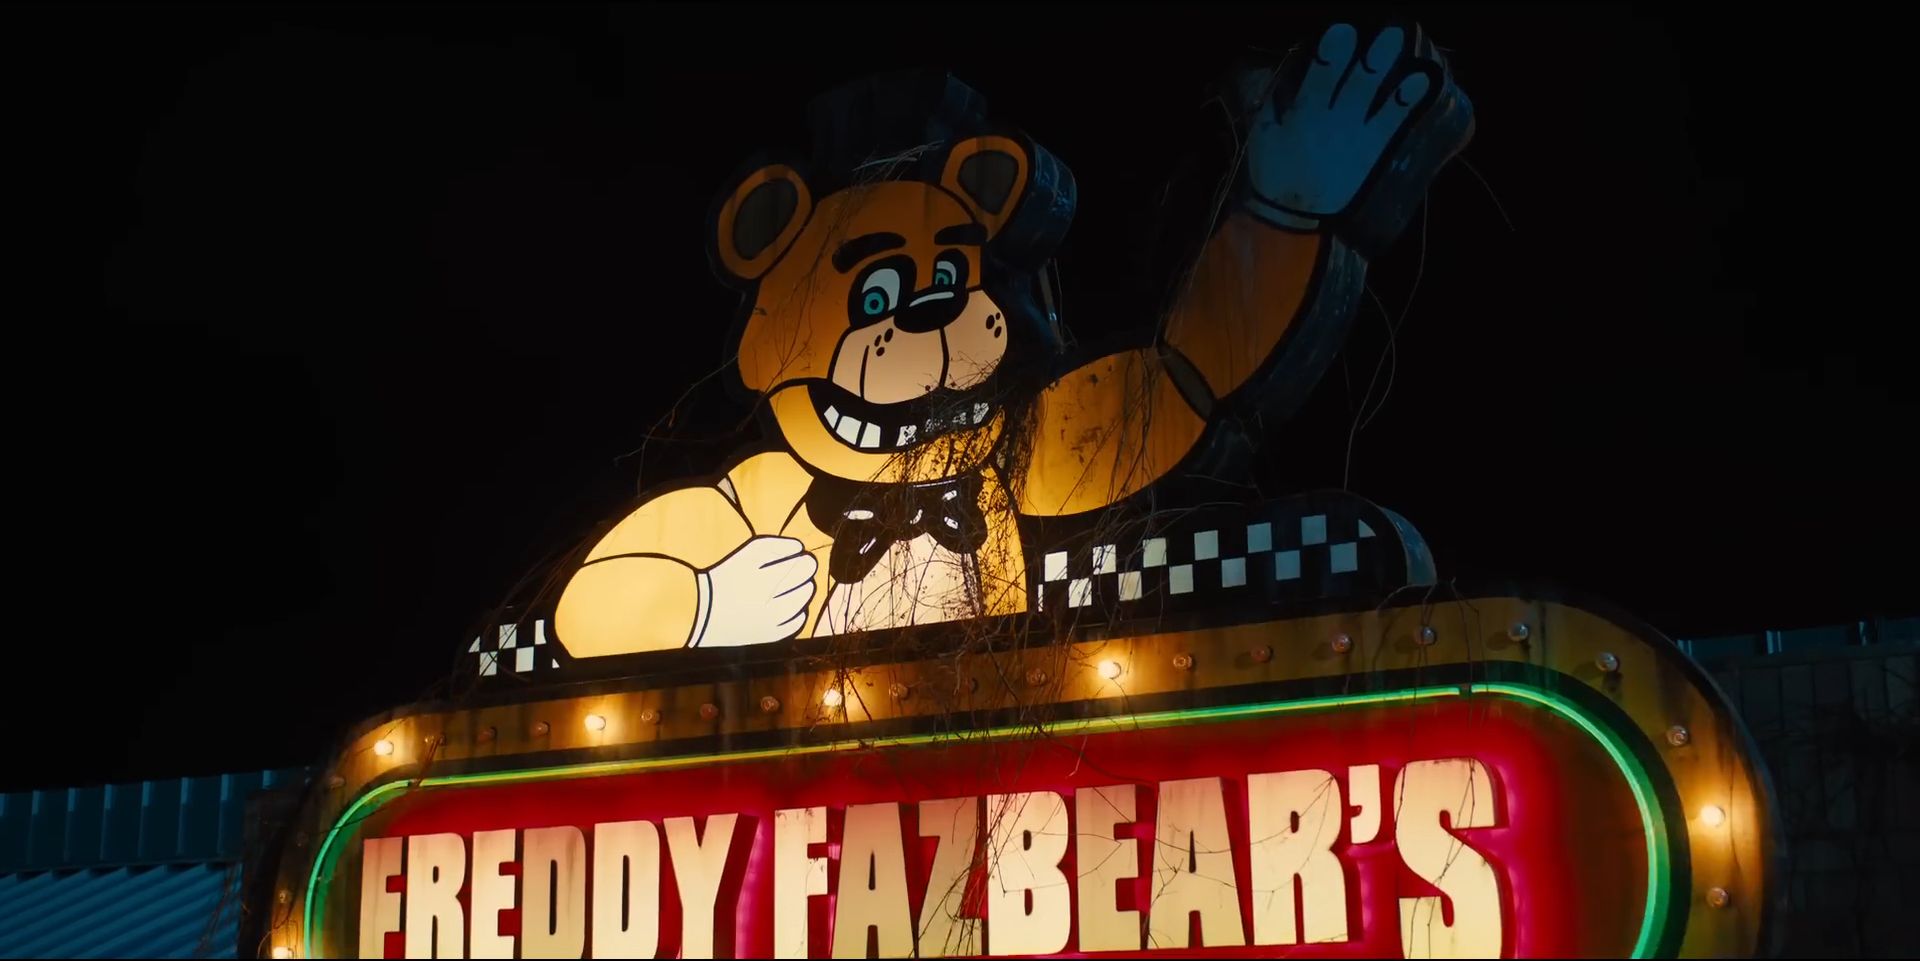 FNAF BOY GAMING's Profile and Image Gallery